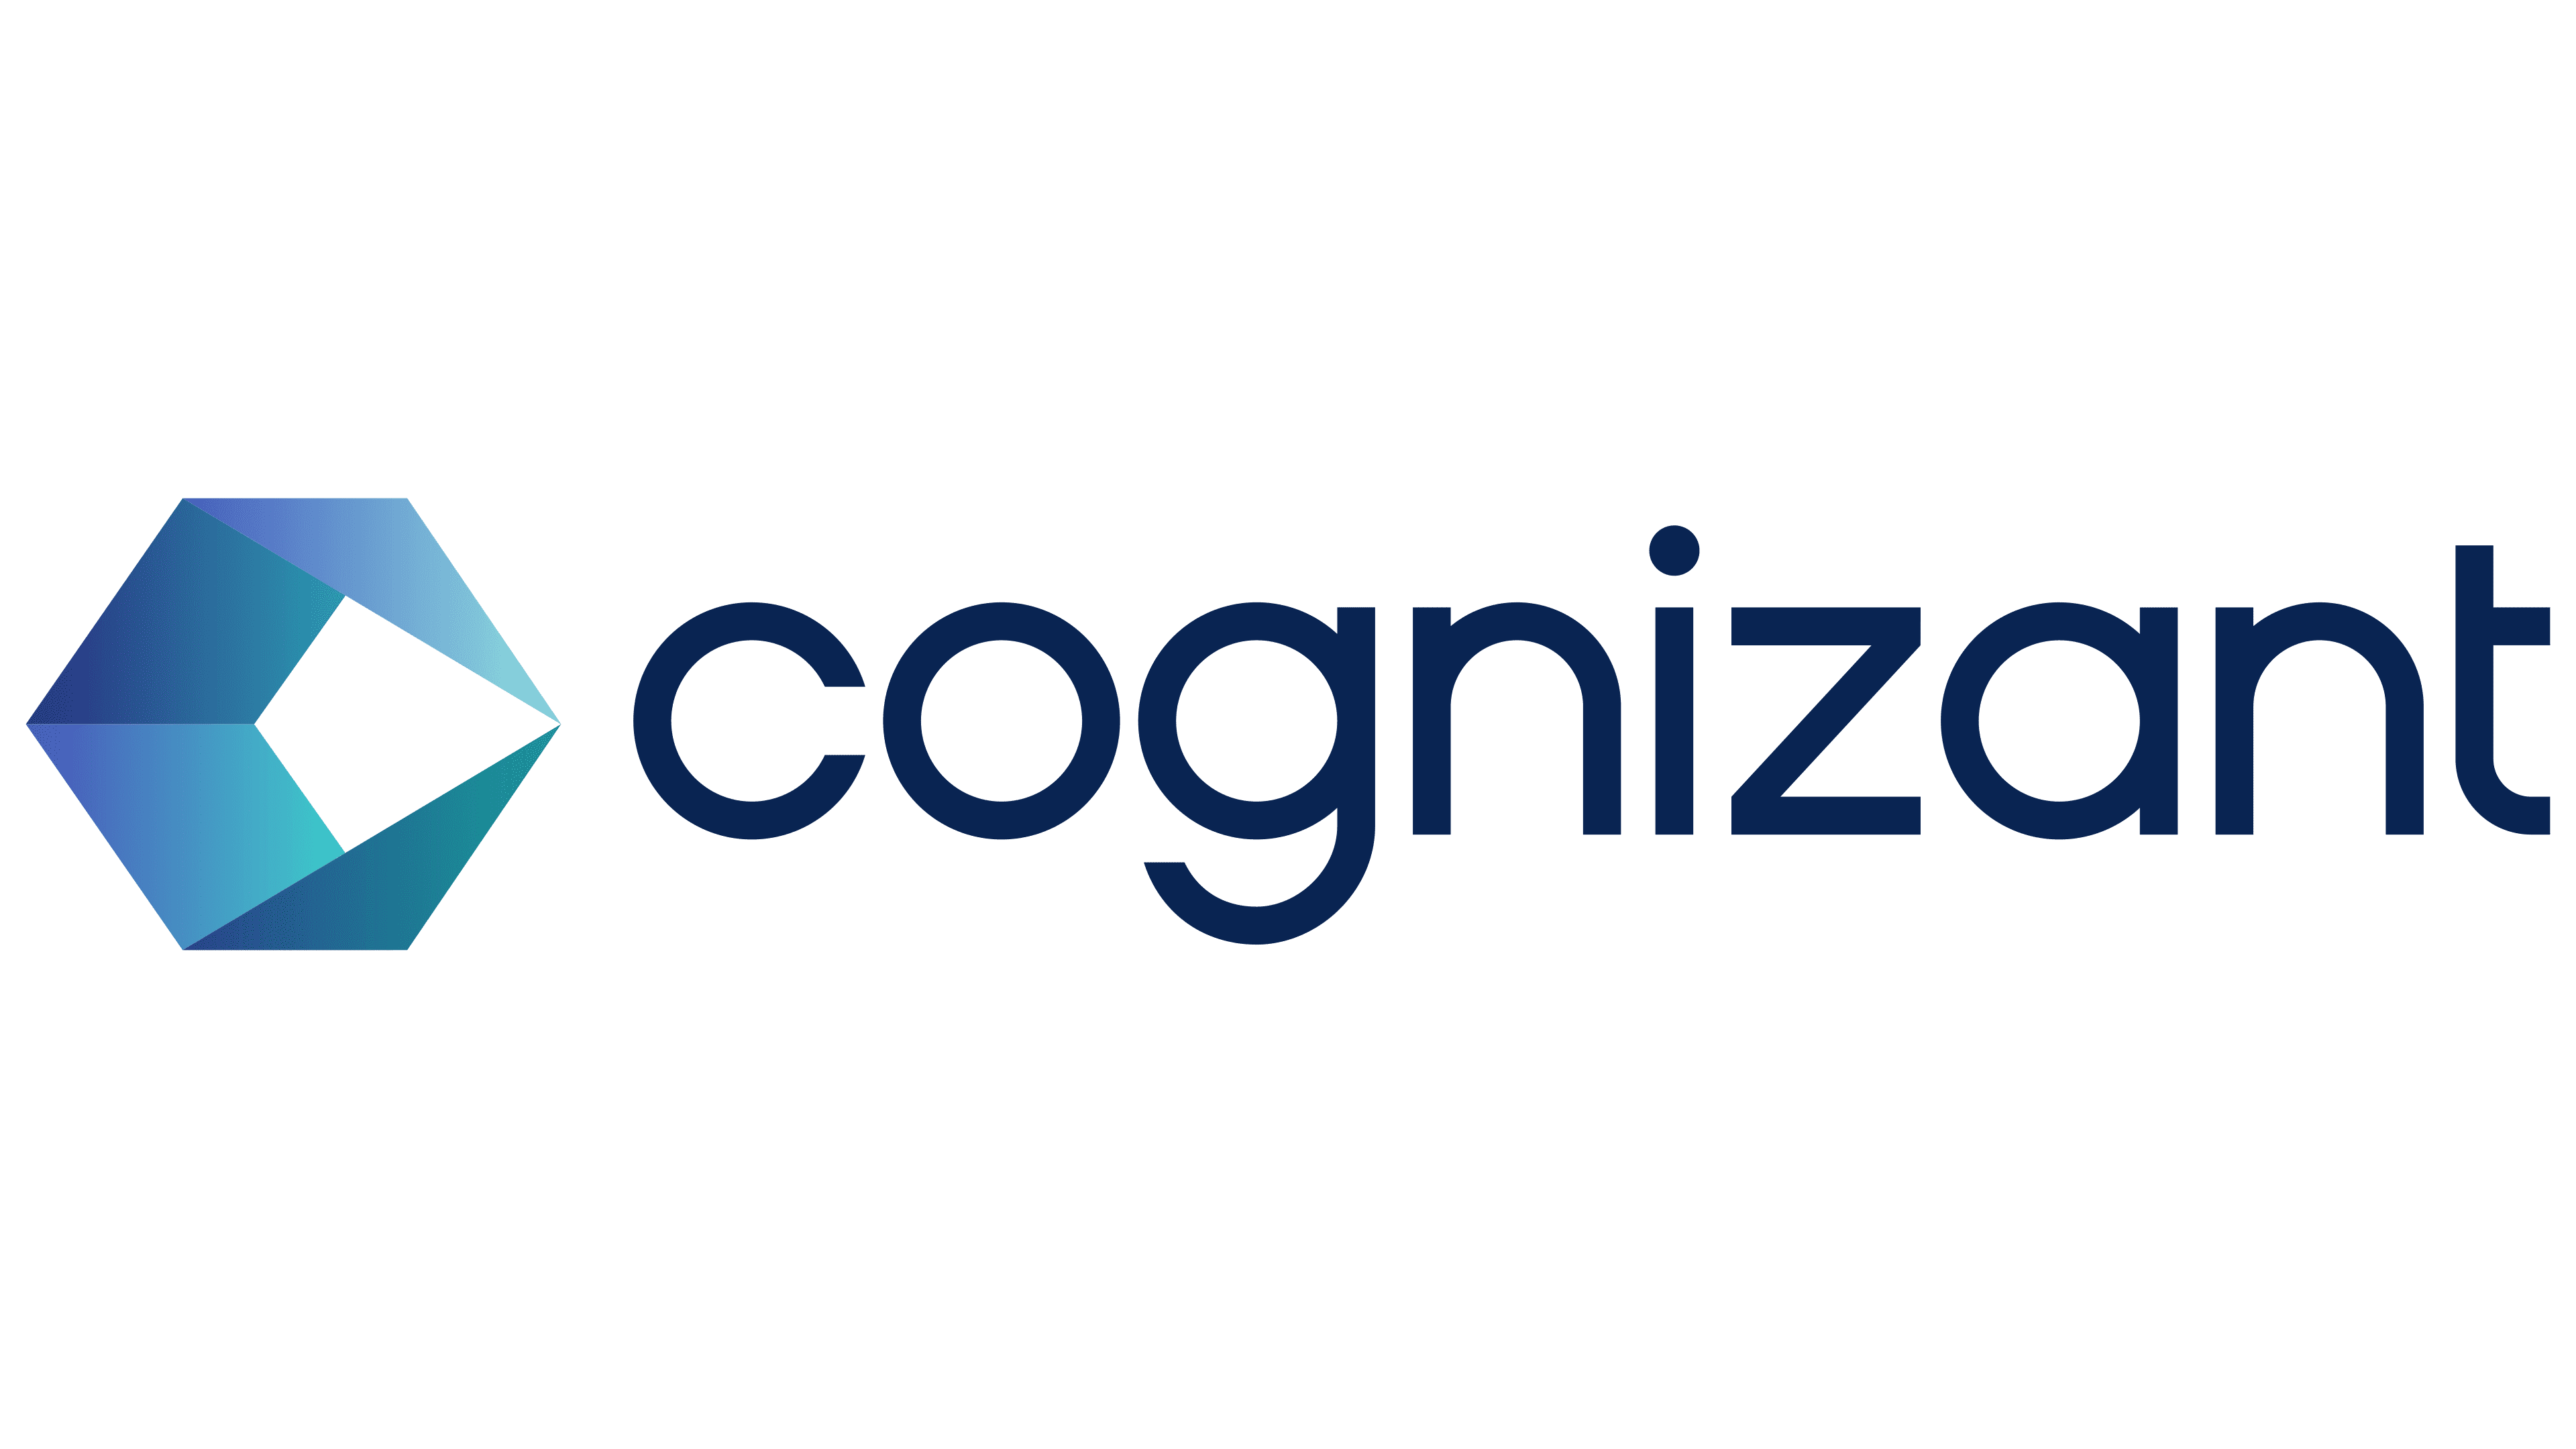 Cognizant Launches Its Neuro AI Platform to Help Companies Responsibly Deploy Generative AI at Enterprise Scale